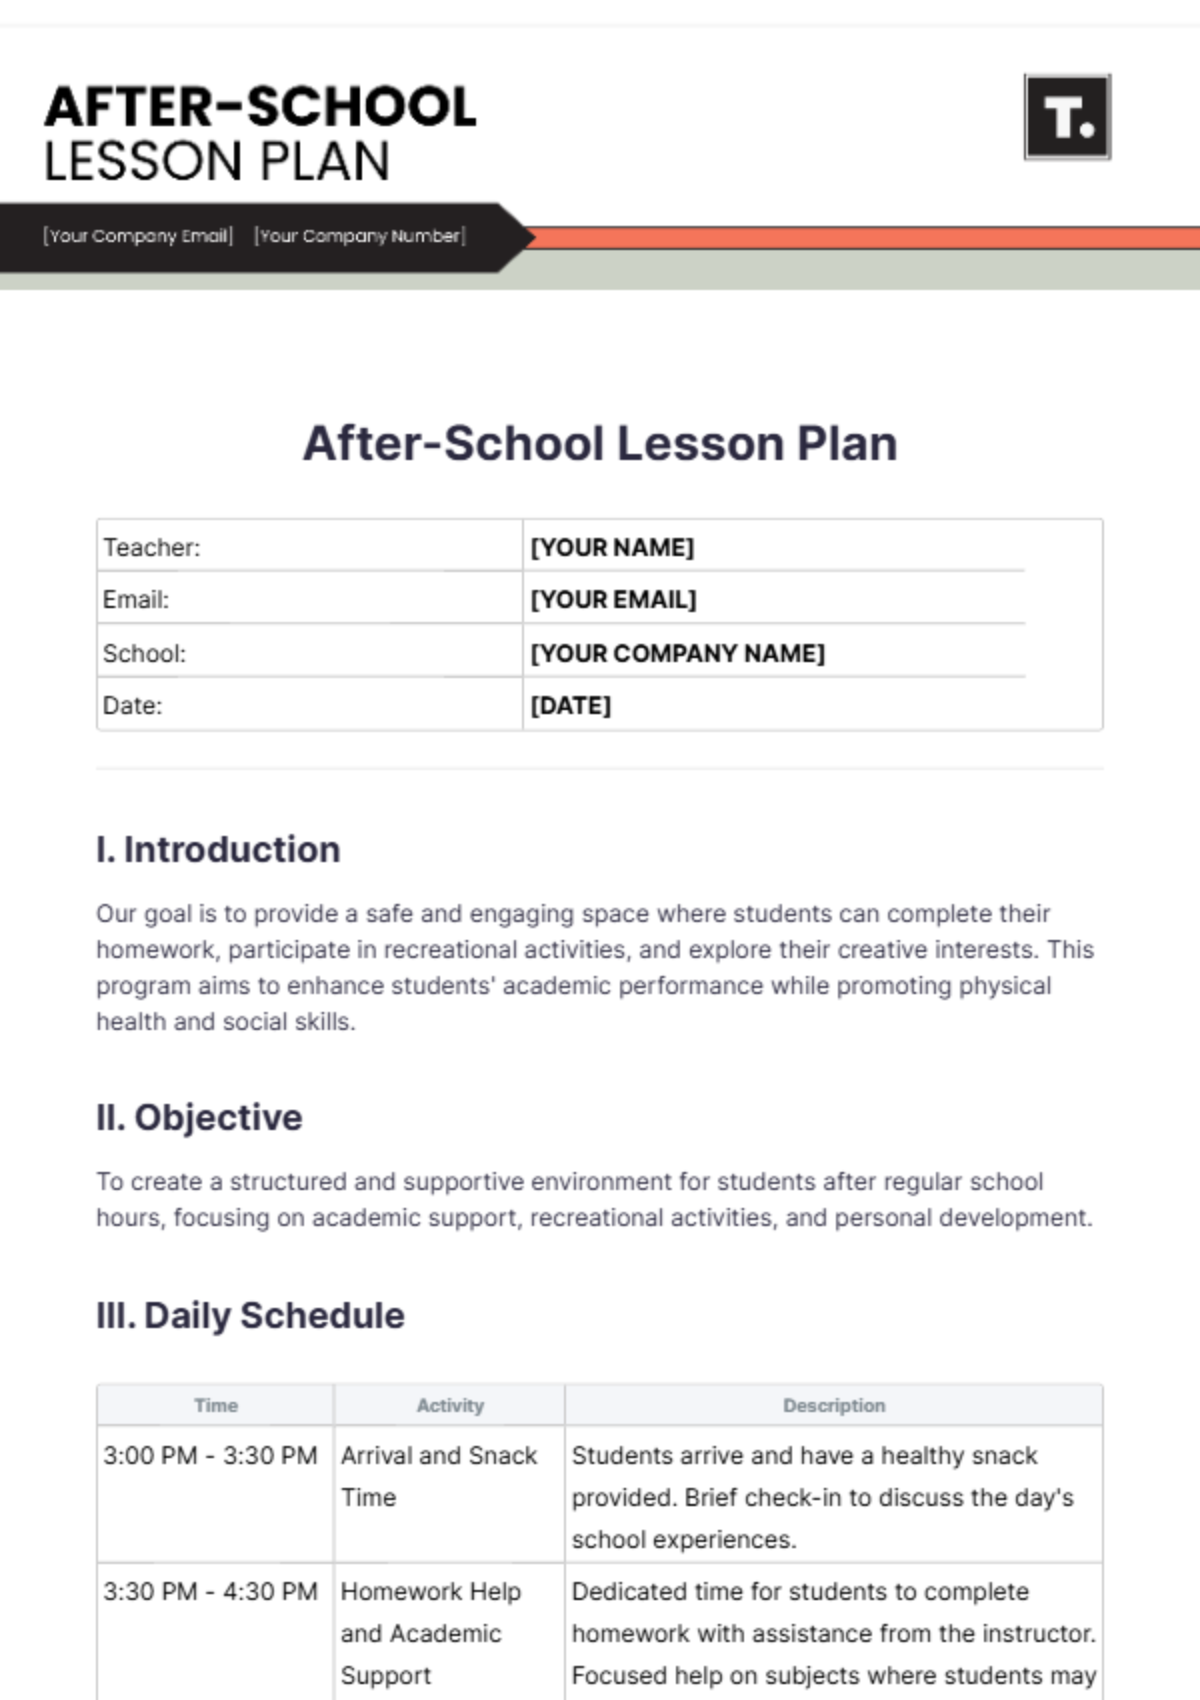 Free After-School Lesson Plan Template